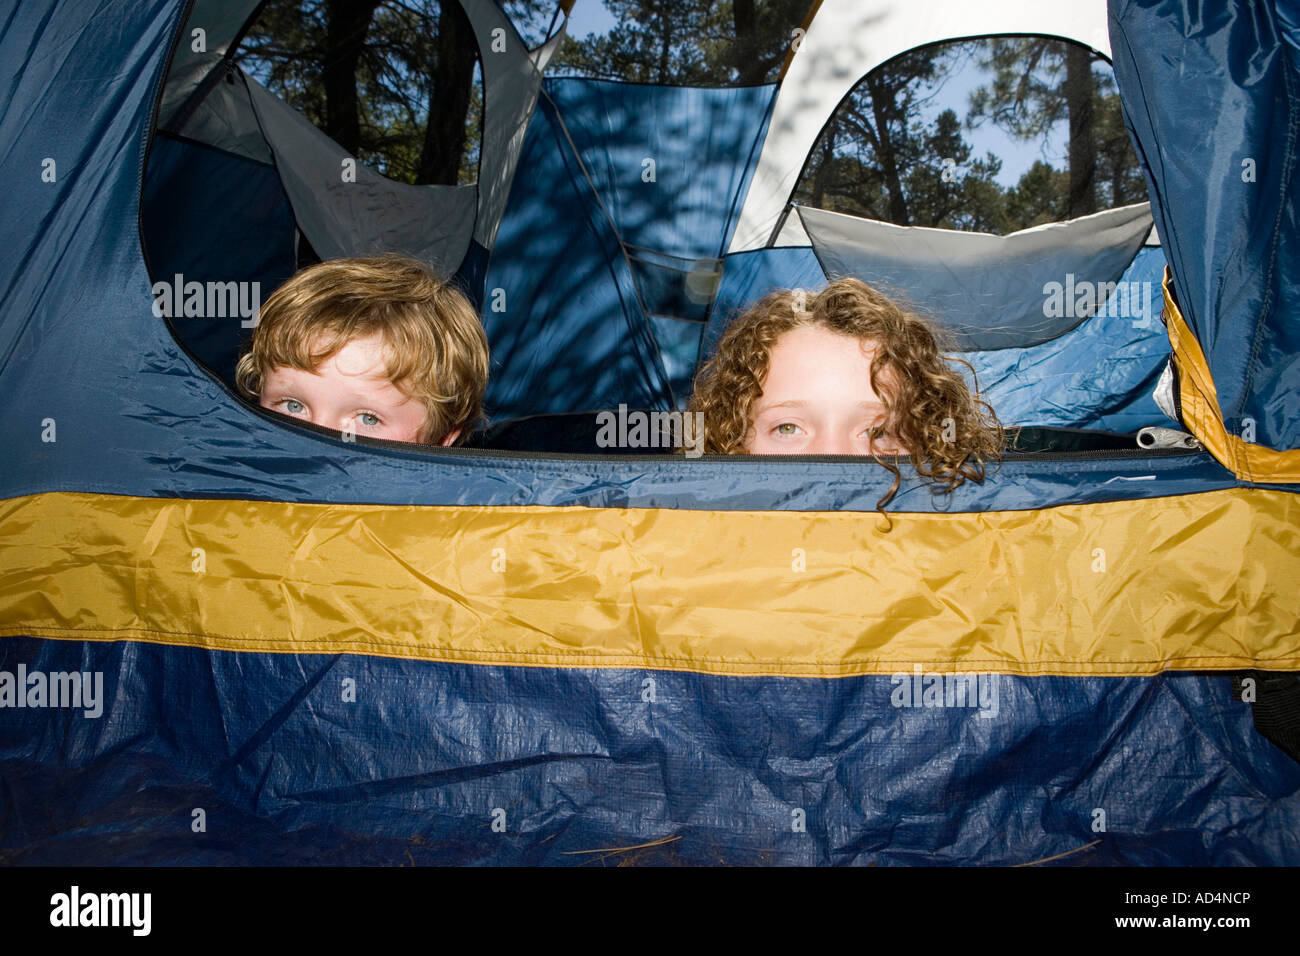 Two boys hiding in a tent Stock Photo